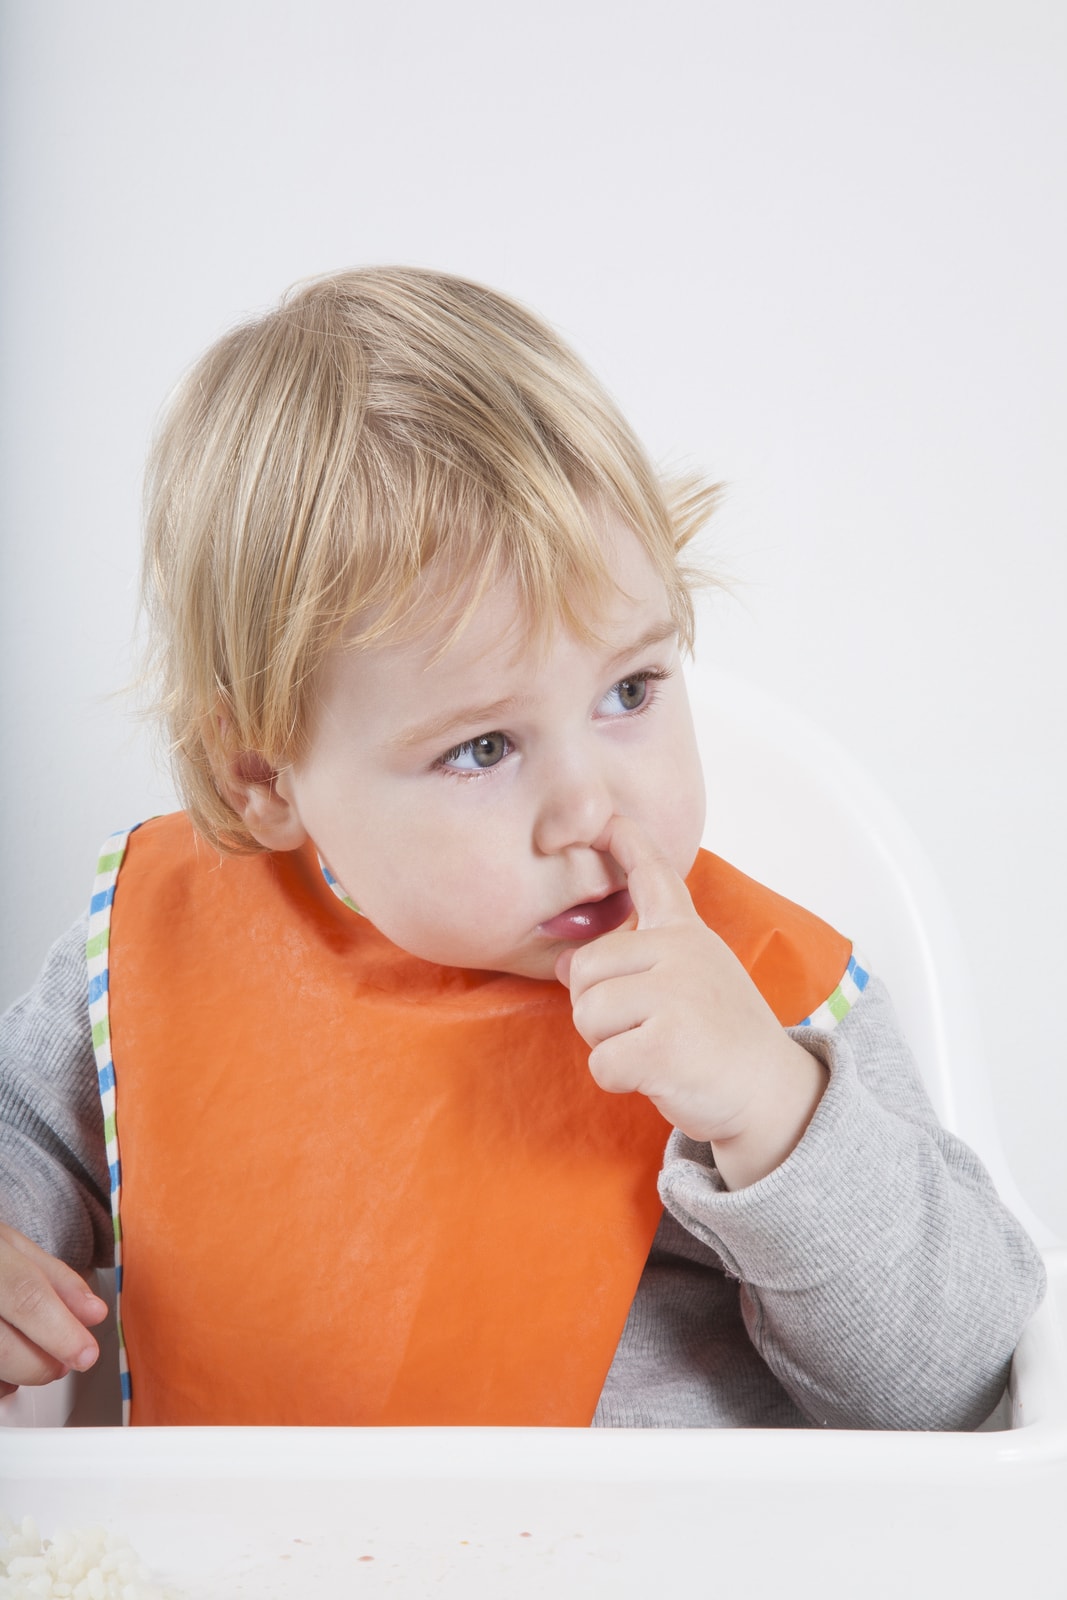 Why Do Kids Eat Boogers